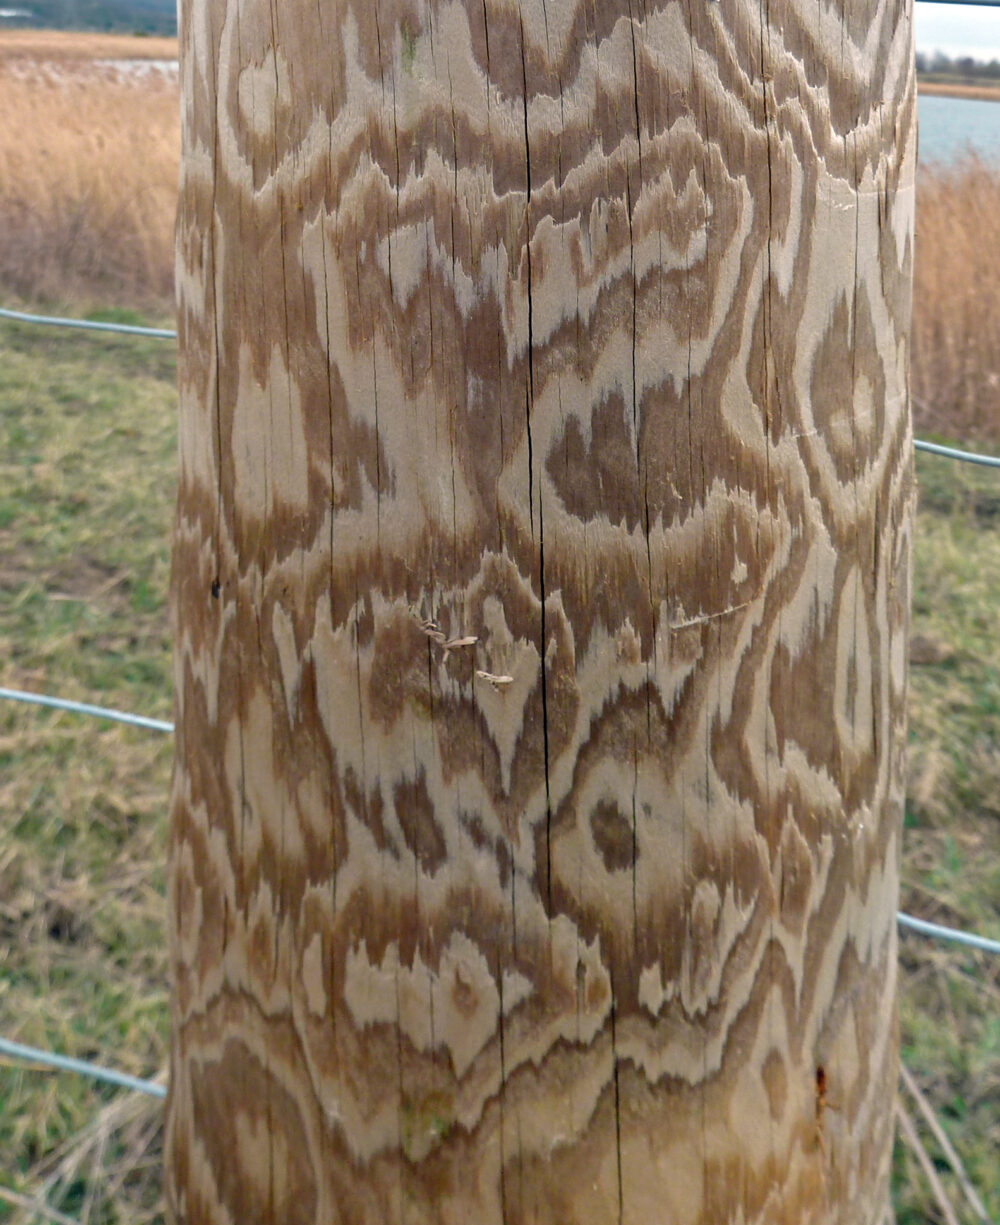 Fence Post, Bark Removed